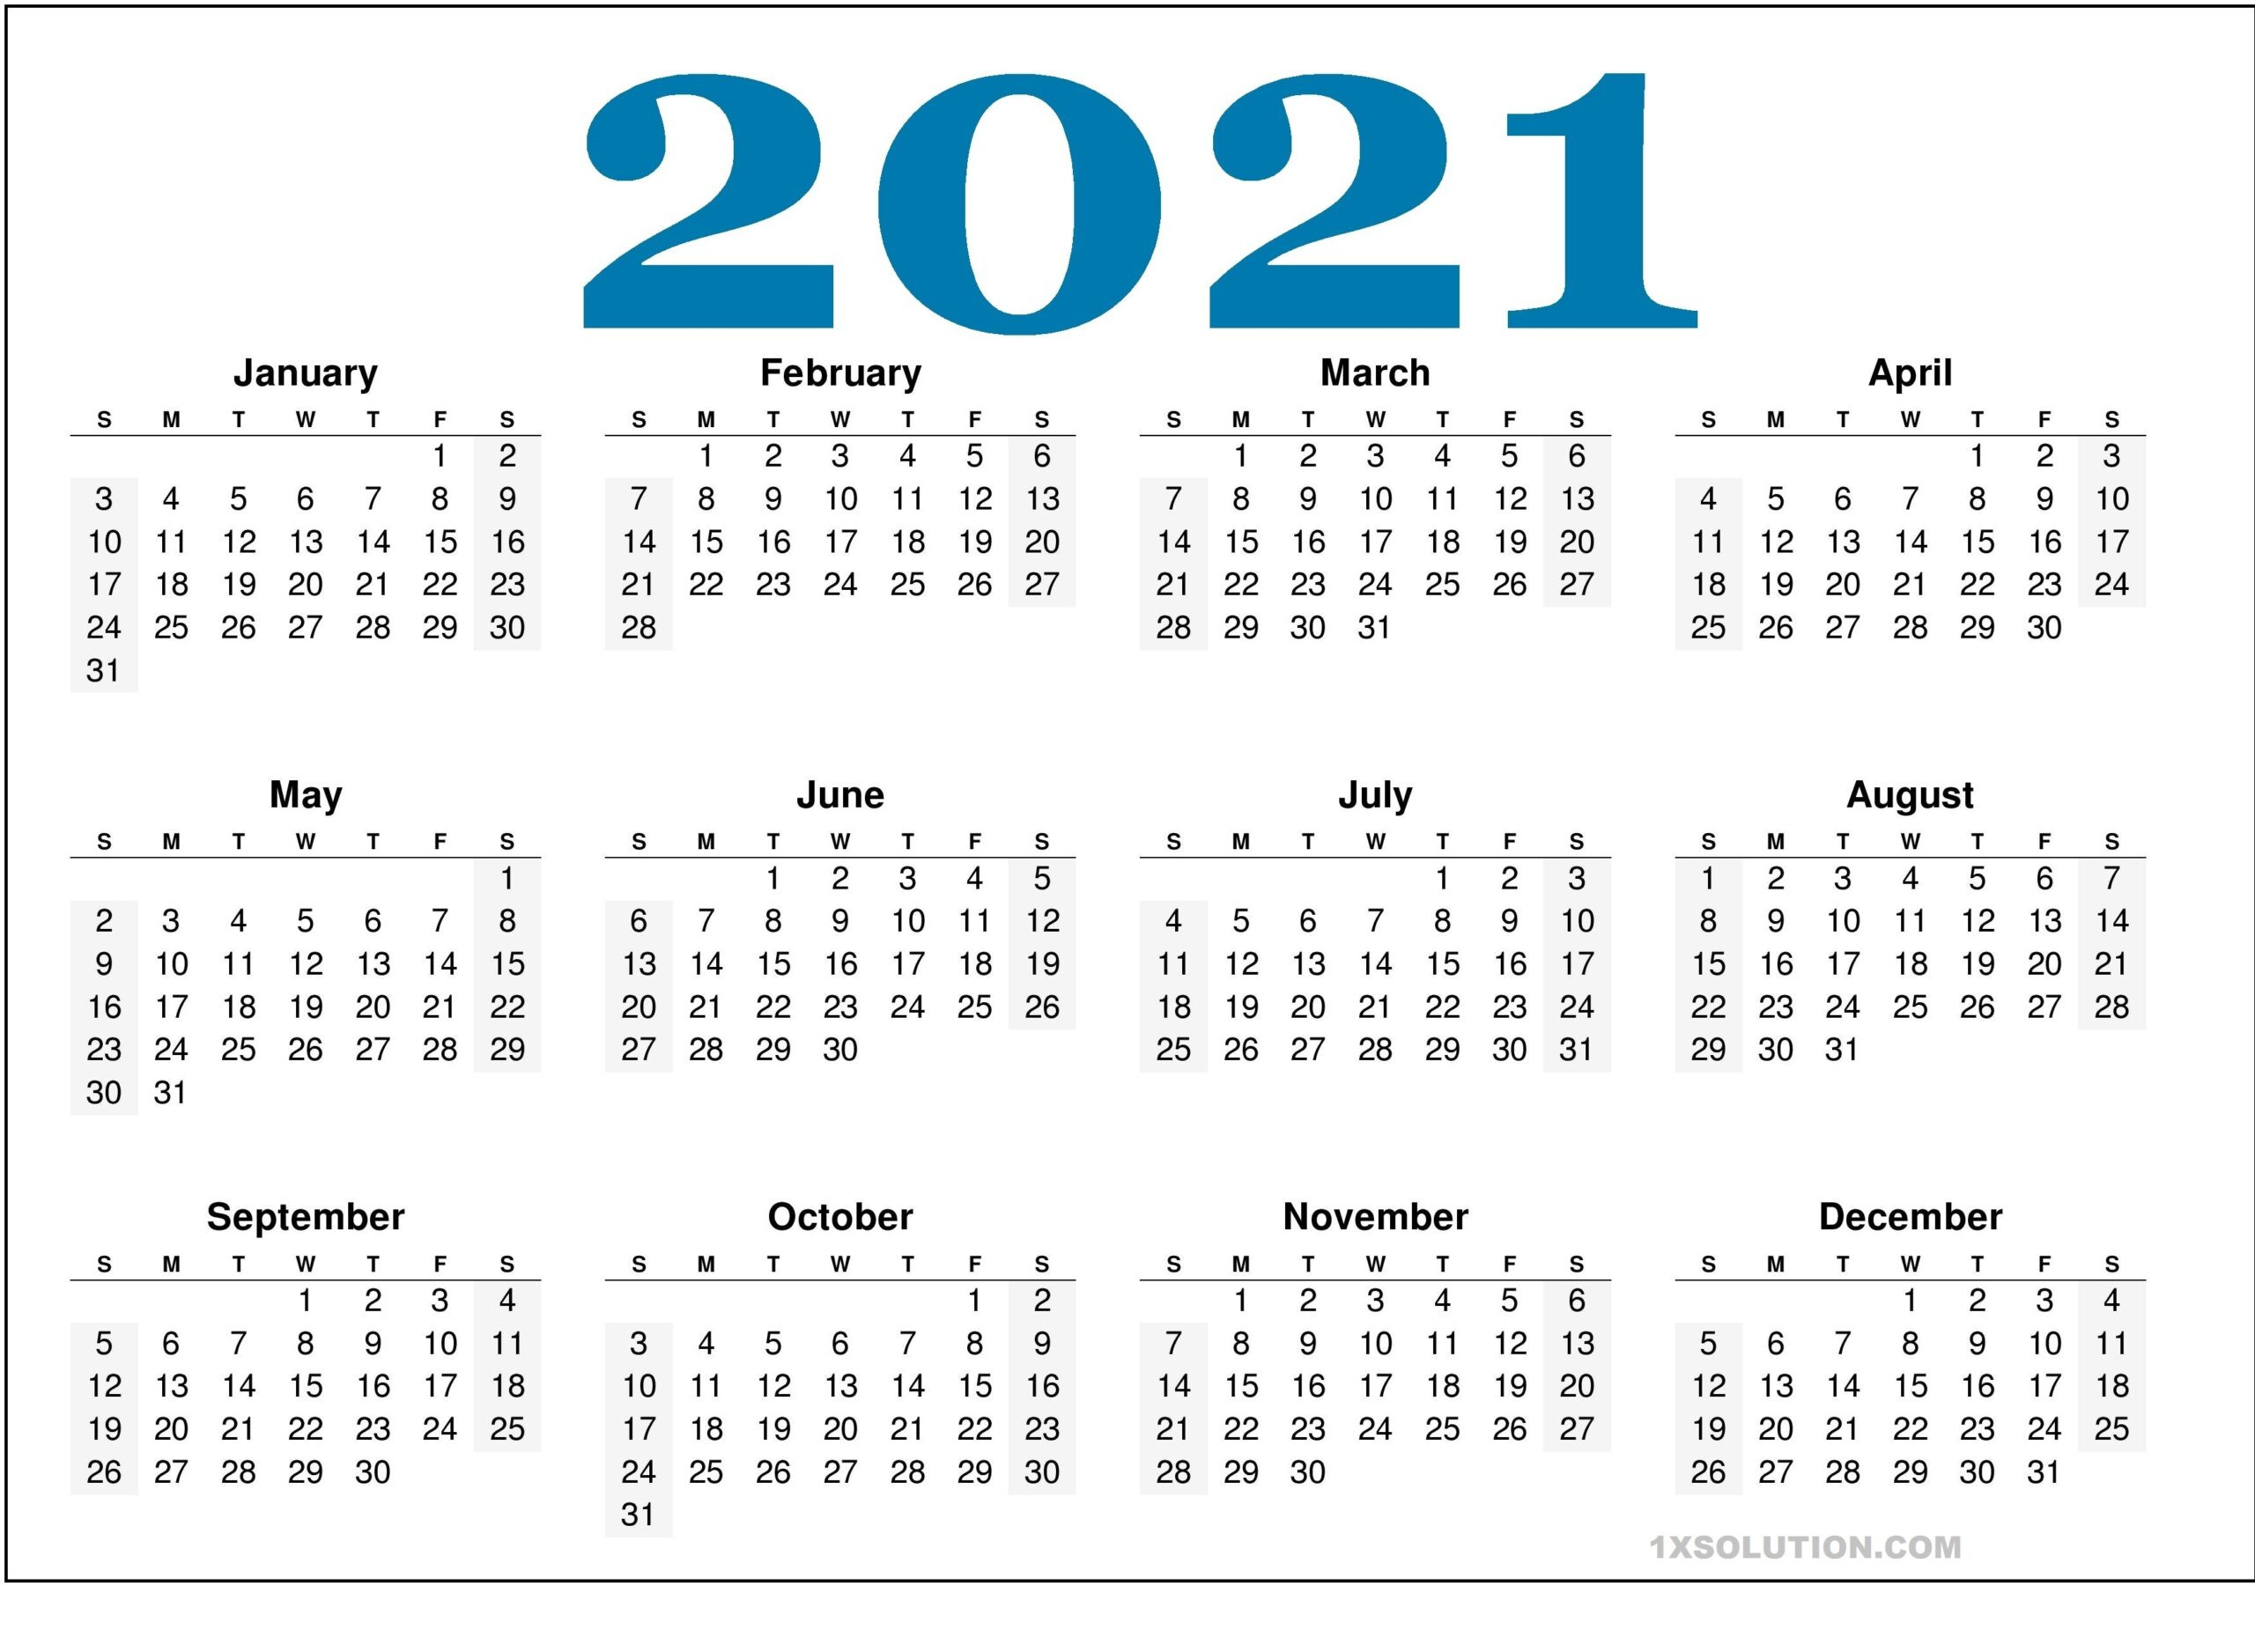 2021 Daily Calendar: To Write Your Important Schedule-Free 2021 Vacation Calander